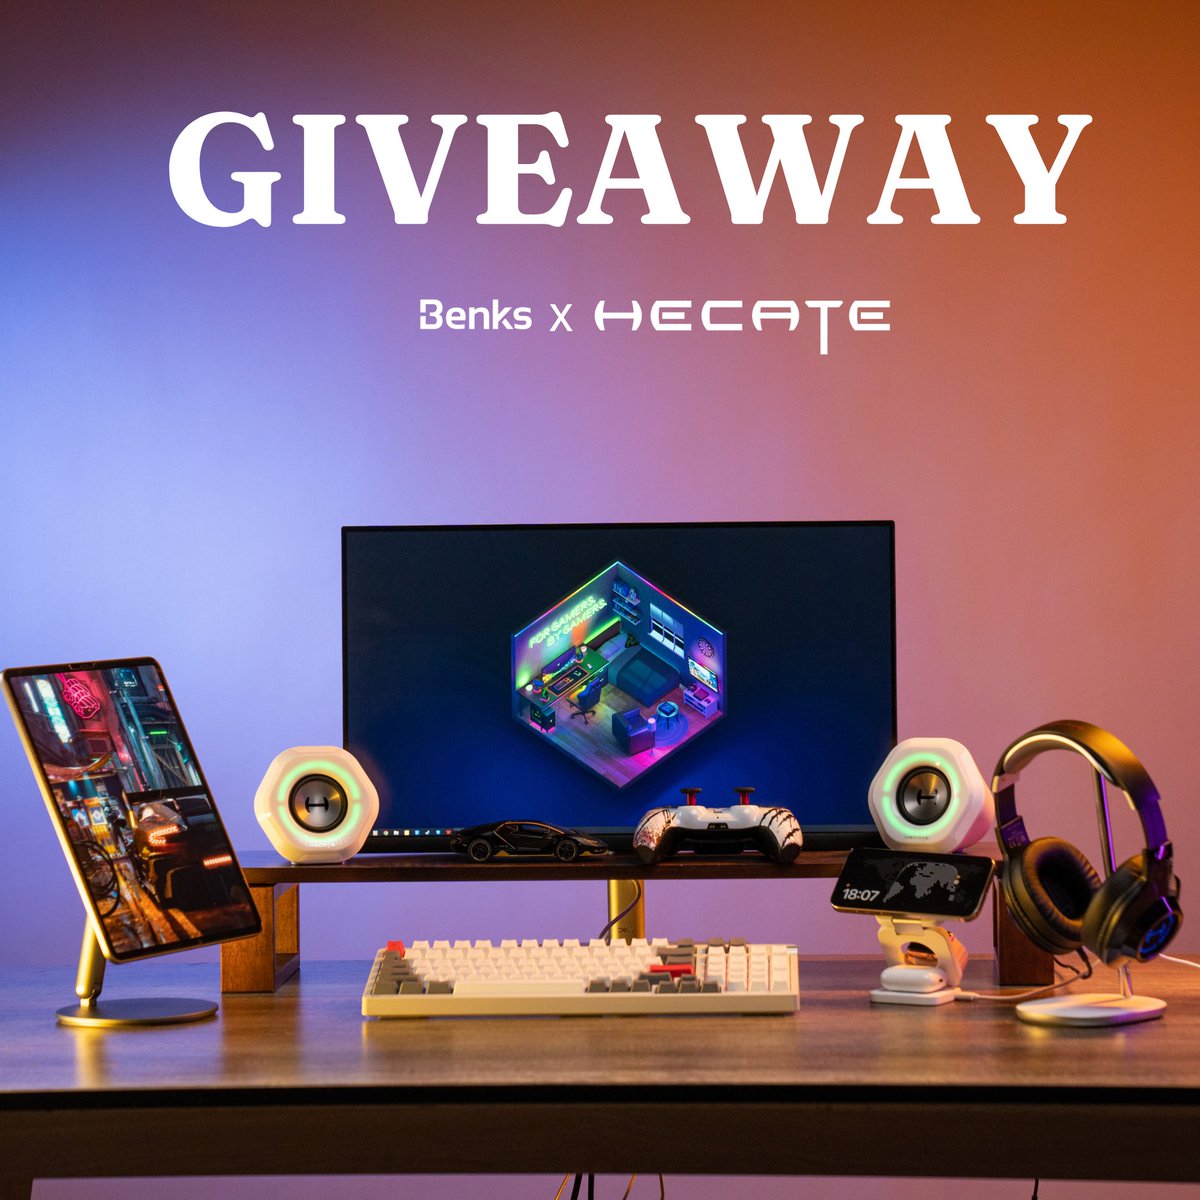 Get ready to level up your gaming station with @Benks_Official & @Edifier_Global 🚀 To Enter: - Follow @Benks_Official @Edifier_Global - Like & RT - Tag 2 friends (unlimited entries) Open worldwide. End on March 24, 11:59pm PST. 2 winners will be randomly chosen! GLHF!🌟🎊